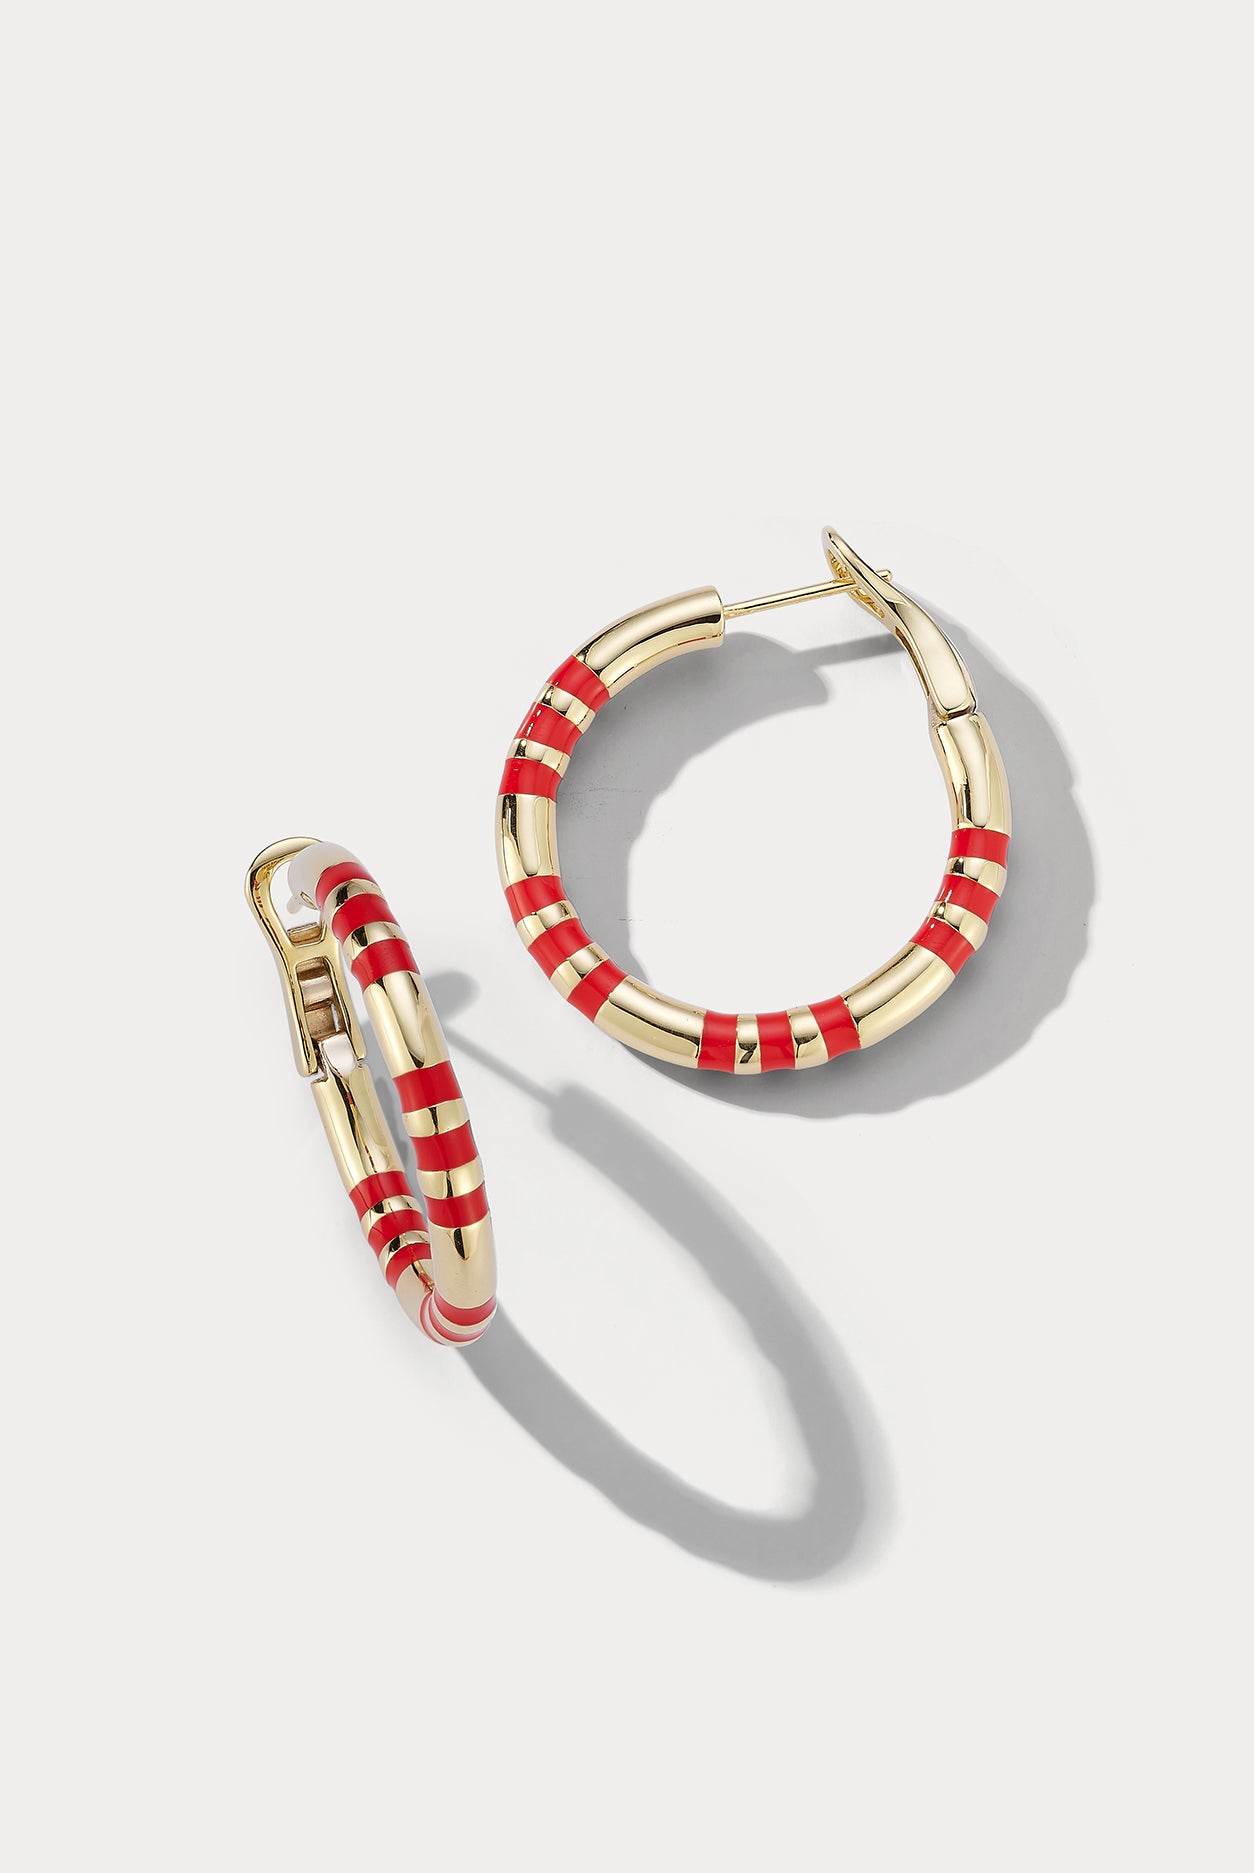 Small Yellow Gold and Red Enamel Hoops - Ammrada